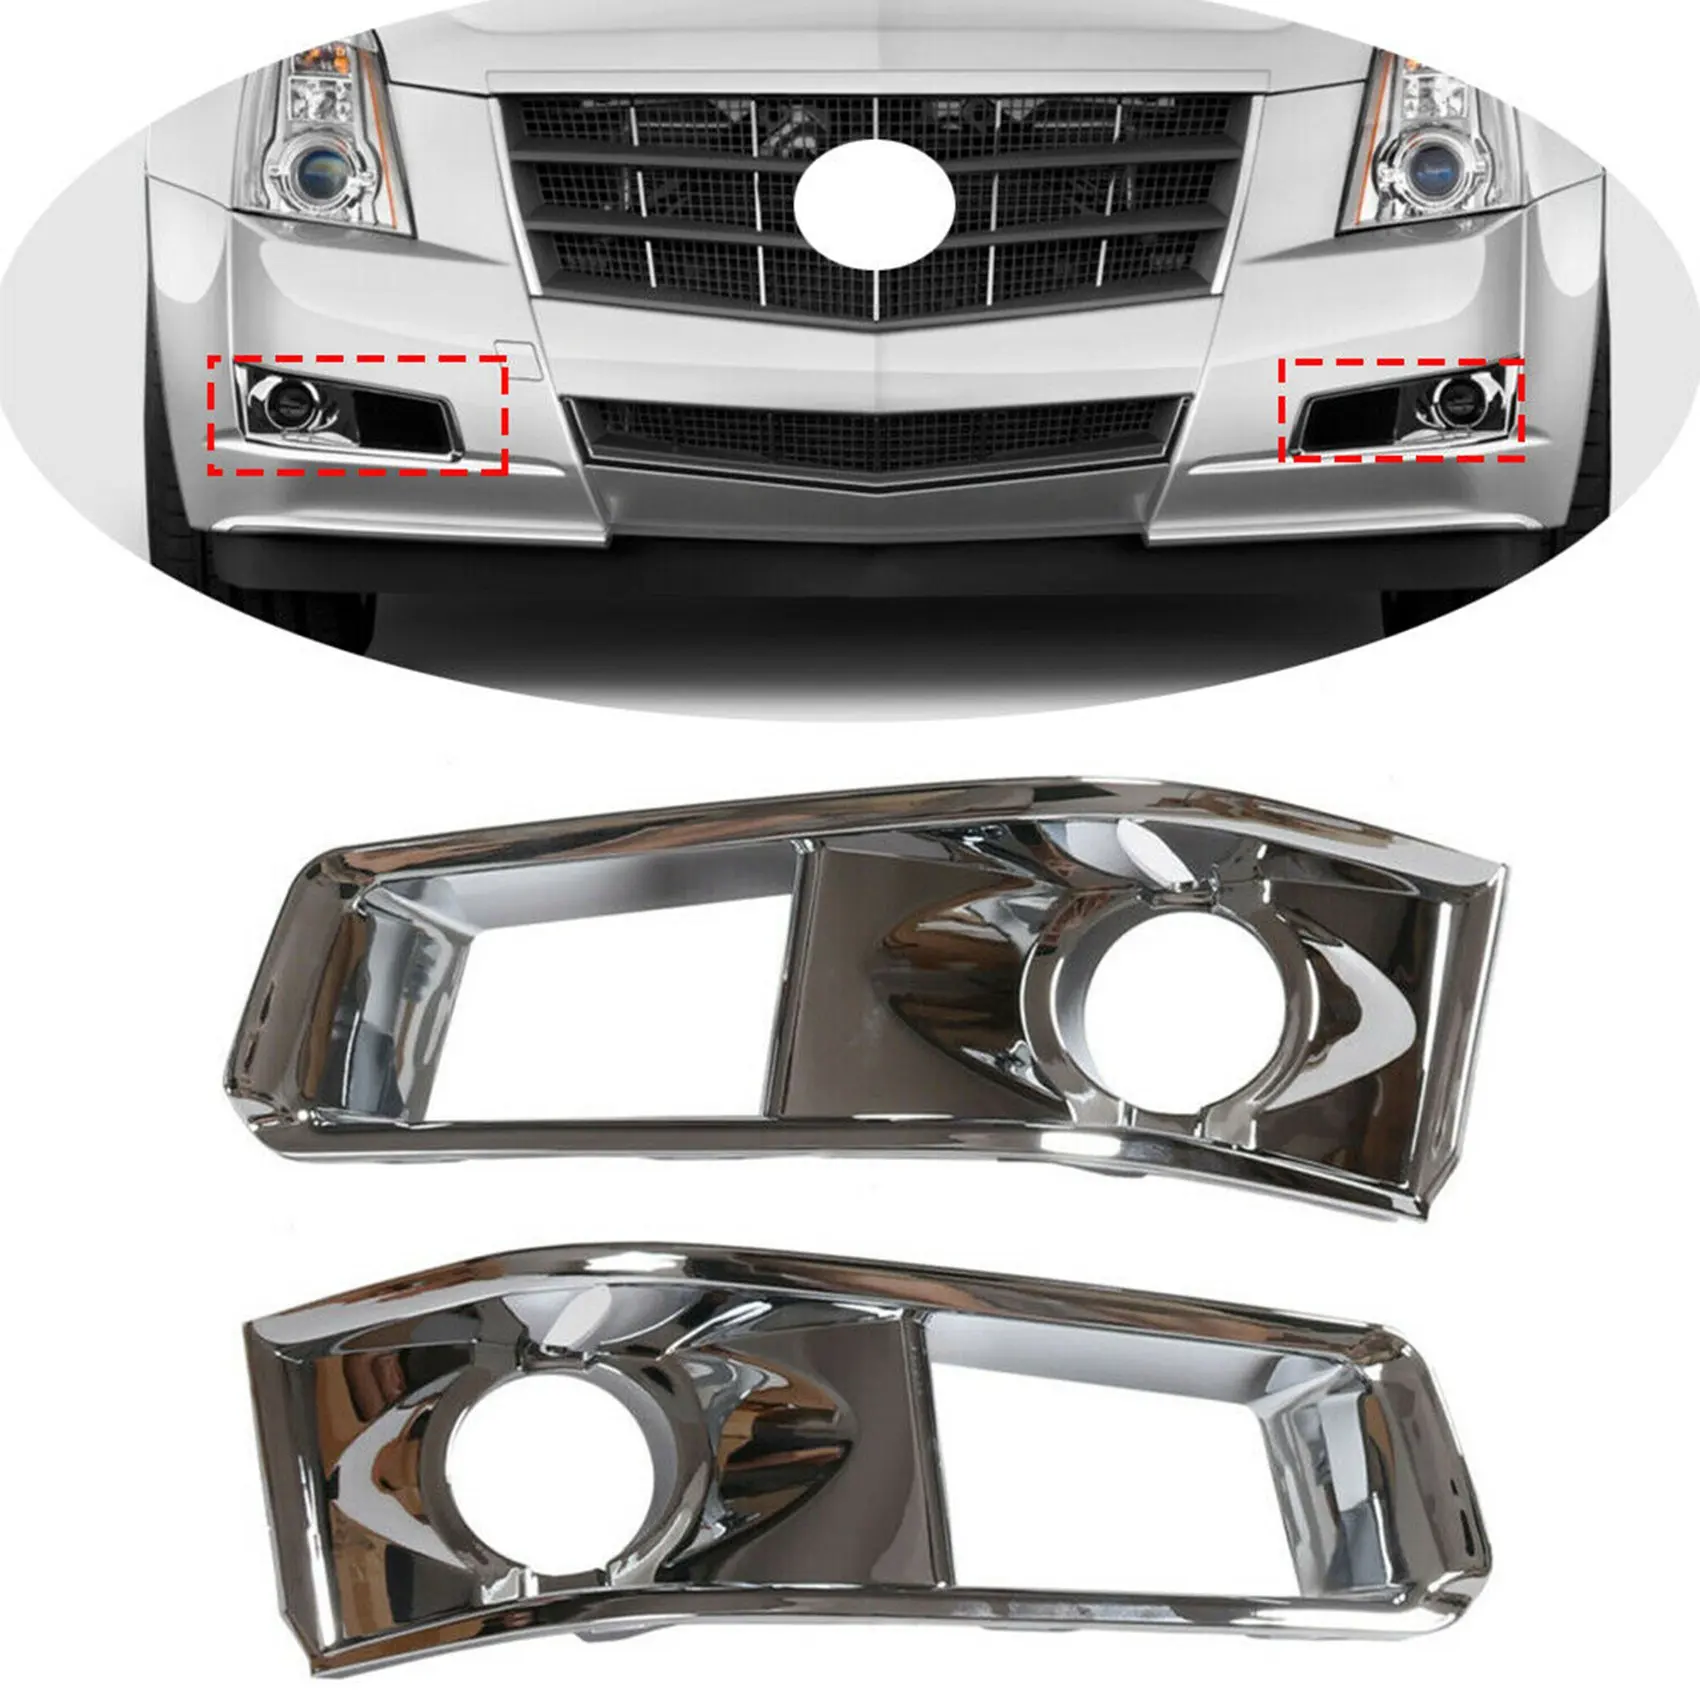 

Front Fog Driving Light Cover Grille Fit for Cadillac CTS 2011-2014 Chrome 1 Pair 15904574(LH) 15904575(RH)